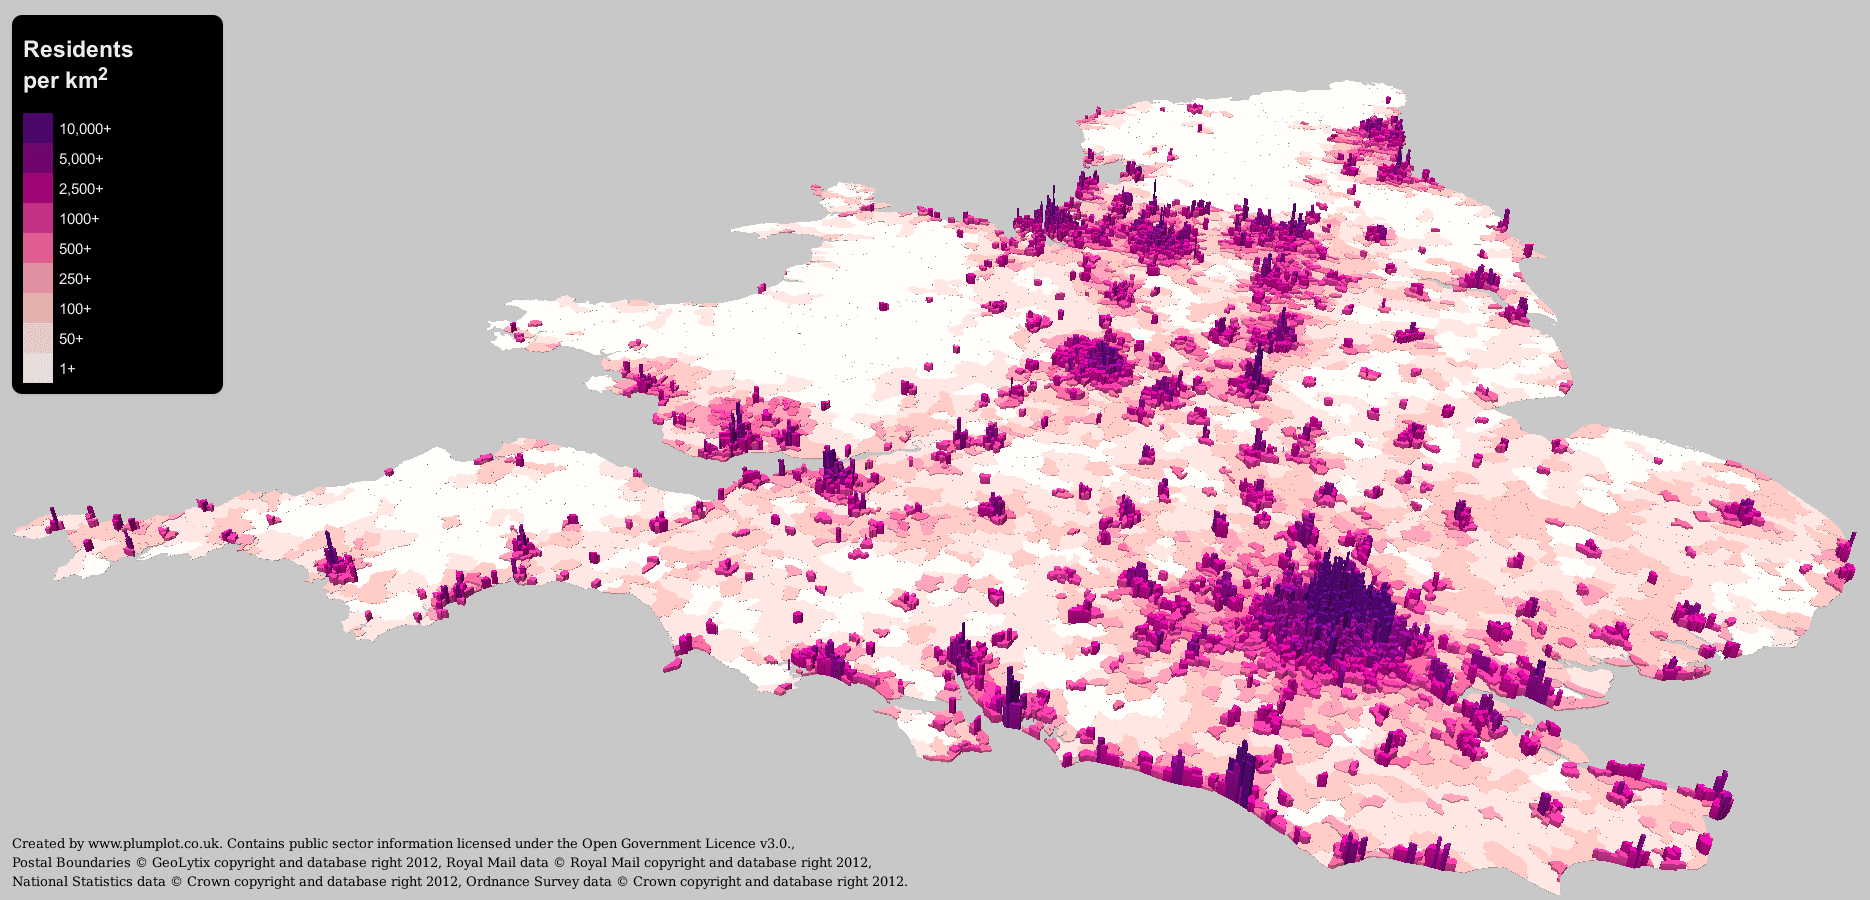 extruded/perspective height map of population density in the UK (residents per km2), see text above